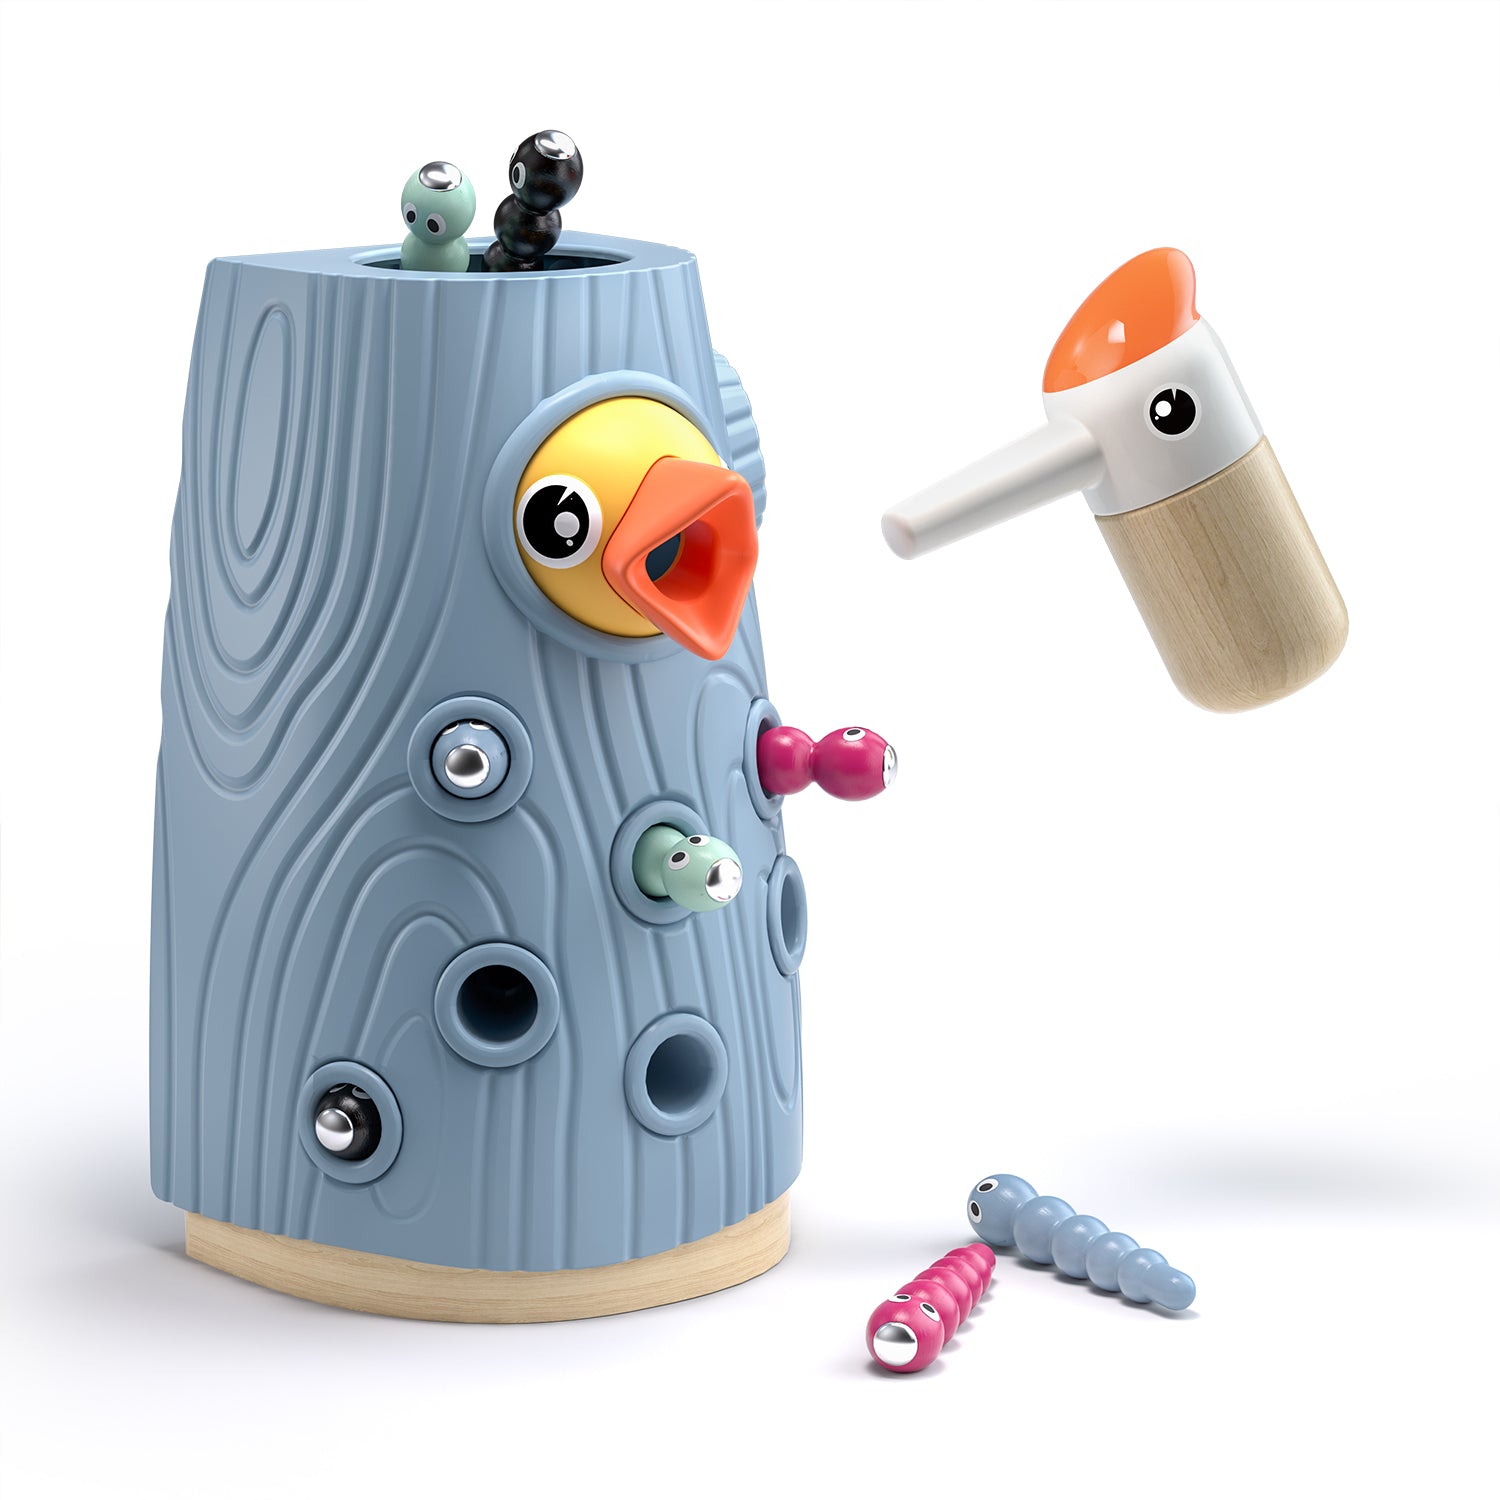 First numbers: With this educational toy, children learn their first numbers. The game prompts them to count the colourful worms when they catch them in the tree trunk.